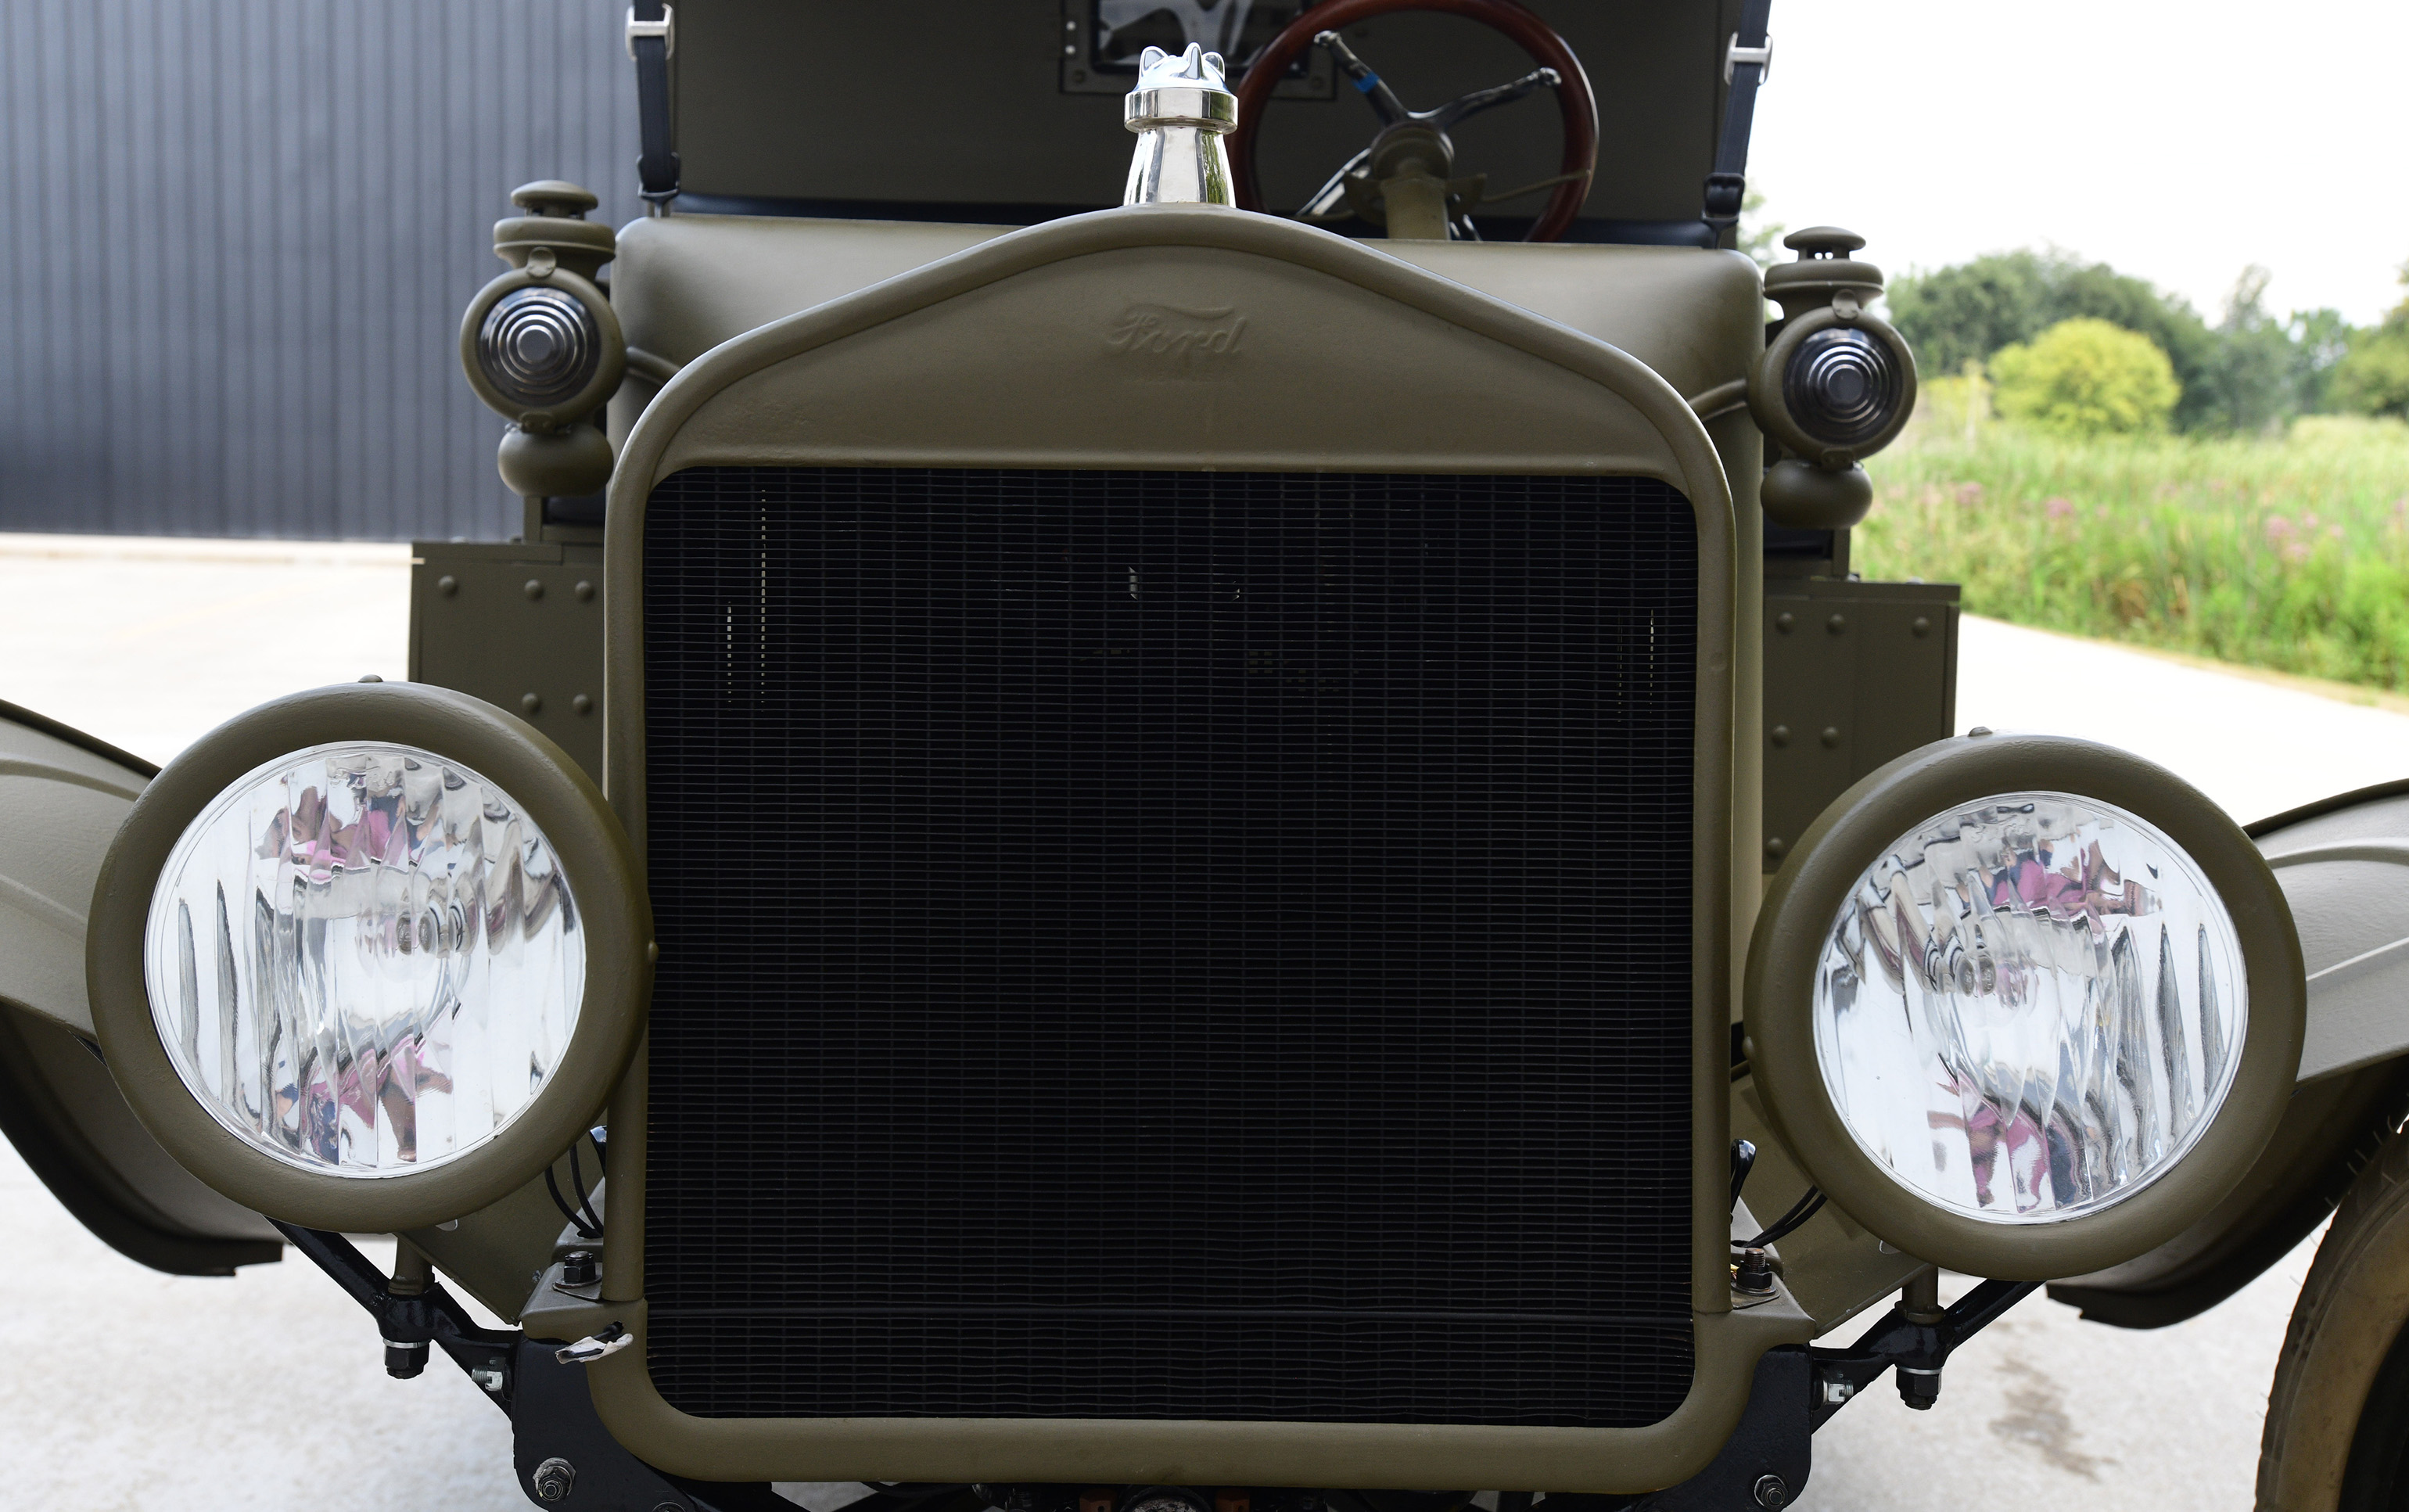 The Michigan Military Heritage Museum converted a 1917 Ford Model T to a World War I era ambulance. The ambulance was on display at the Grass Lake museum on Thursday, Aug. 27, 2020. It took three years for the restoration to complete.